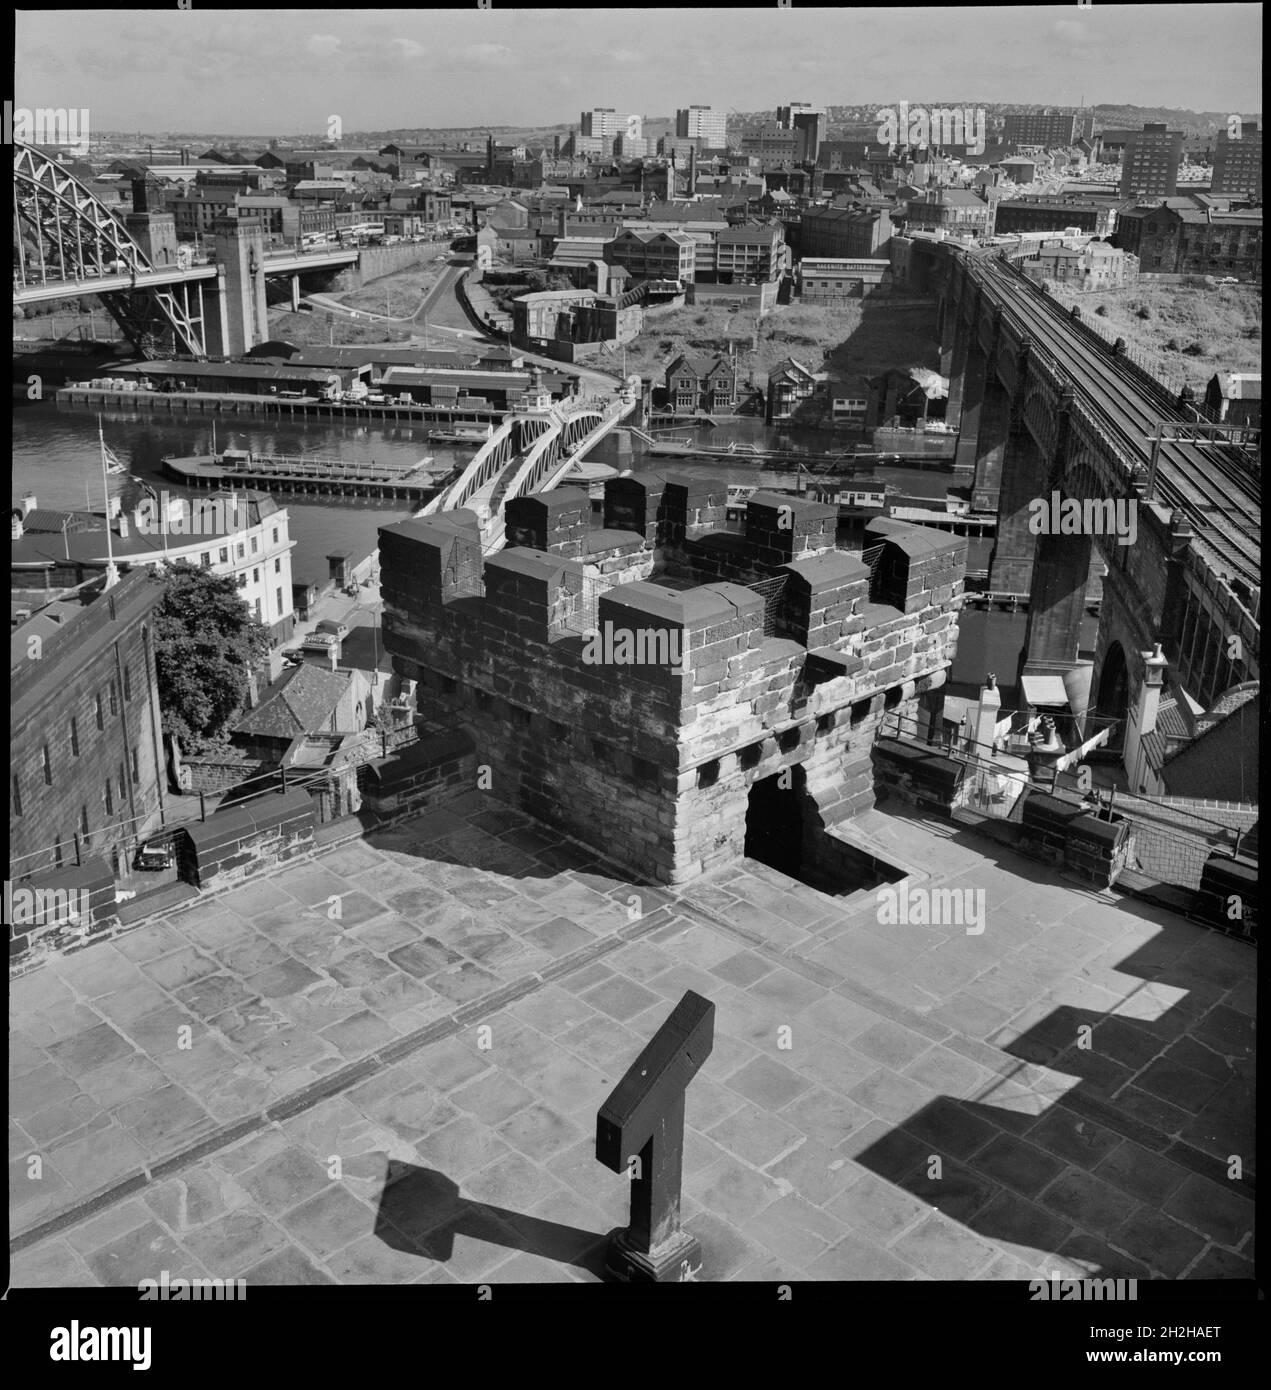 Castle Keep, Castle Garth, Newcastle Upon Tyne, c1955-c1980. A cityscape of Newcastle, looking south over the River Tyne from the roof of Castle Garth Keep. The keep was built between 1168 and 1178, with the roof and battlements added c1811 by Newcastle Corporation. It was later restored c1848 for the Society of Antiquaries of Newcastle. The tower is square in plan with three storeys. In the foreground is the River Tyne, with the Tyne Bridge on the left, Swing Bridge, and High Level Bridge on the right. The image continues looking south. Stock Photo